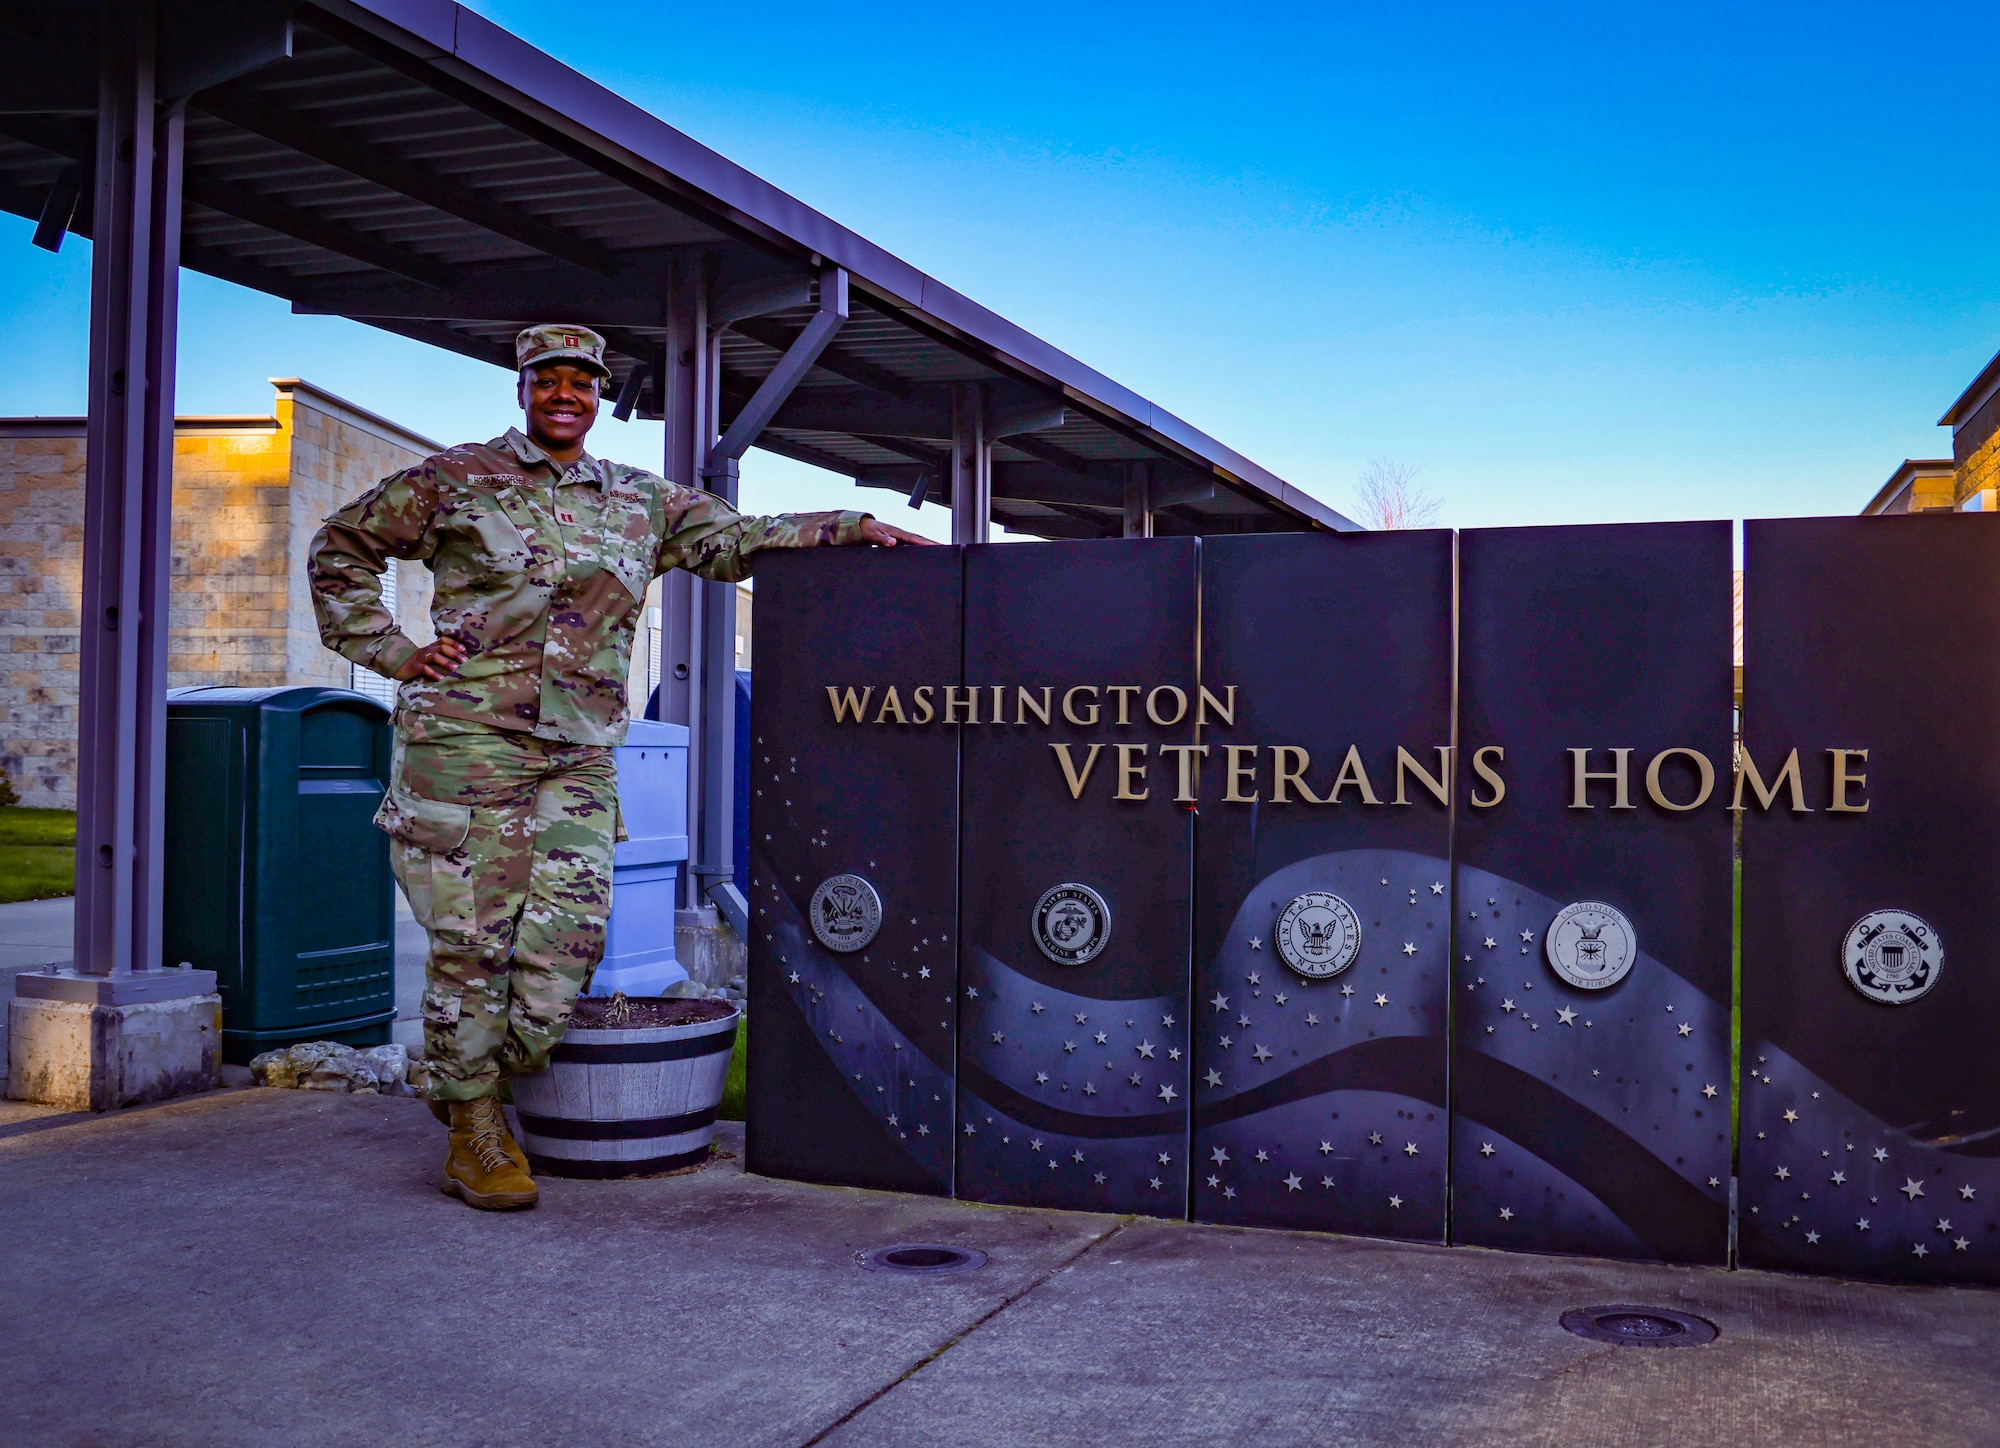 Air Force Capt. Geneva Hoskins-Dorsey, 194th Medical Group, Washington Air National Guard, poses for a photo at the Veterans Home in Port Orchard, Washington, March 9, 2022. Hoskins-Dorsey was the officer in charge of the Port Orchard facility as members of her team helped veterans' home employees by answering resident call lights and non-clinical requests and performing COVID screenings.